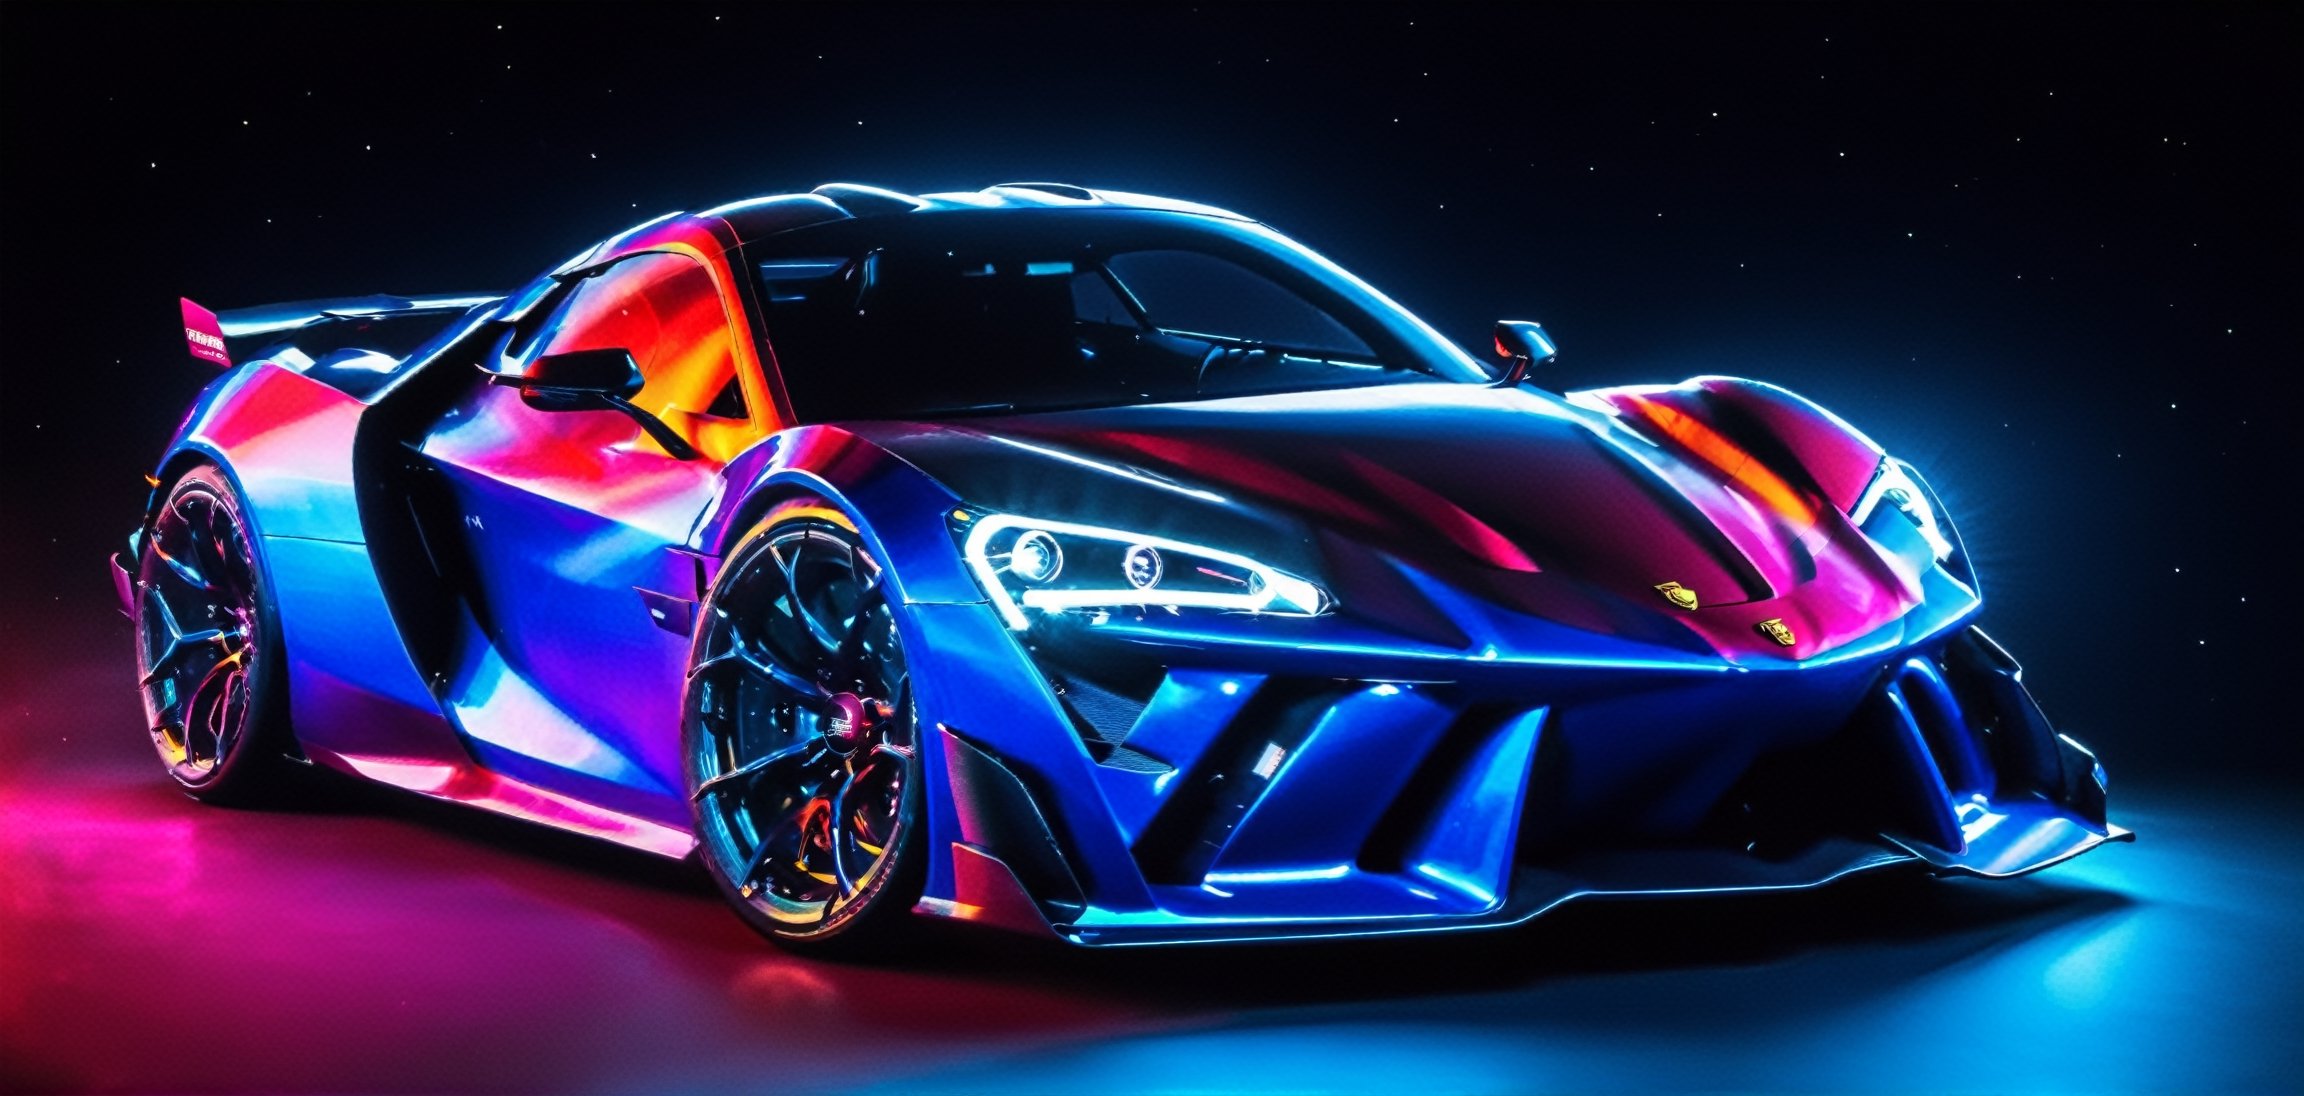 ultra-detailed, 8K), Futuristic hyper-car/supercar, dreamlikeart, galaxy, outer space, nebula, star, [cyberpunked] race car with race livery wide body kit,( neon glowing ring in tiers), street racing-inspired, Drifting inspired, LED, ((Twin headlights)), (((Bright neon color racing stripes))), (Black racing wheels), Wheel spin showing motion, Show car in motion, Burnout, wide body kit, modified car, racing livery, realistic, ultra highres, (full dual colour neon lights:1.2), (hard dual color lighting:1.4), (detailed background), (ultra detailed), intricate, comprehensive cinematic, magical photography, (gradients), glossy, Night with galaxy sky, Fast action style, fire out of tail pipes, Sideways drifting in to a turn, Neon galaxy metalic paint with race stripes, GTR Nismo, NSX, Porsche, Lamborghini, Ferrari, Bugatti, Ariel Atom, BMW, Audi, Mazda, Toyota supra, Lamborghini Aventador, aesthetic, intricate, realistic, Neon Paint, streaks of fire, (((depth of field))), cinematic lighting, cinematic lighting, speed lines, (masterpiece), best quality, masterpiece, best quality, (masterpiece:1.2), (best quality)
,neon style,dc100